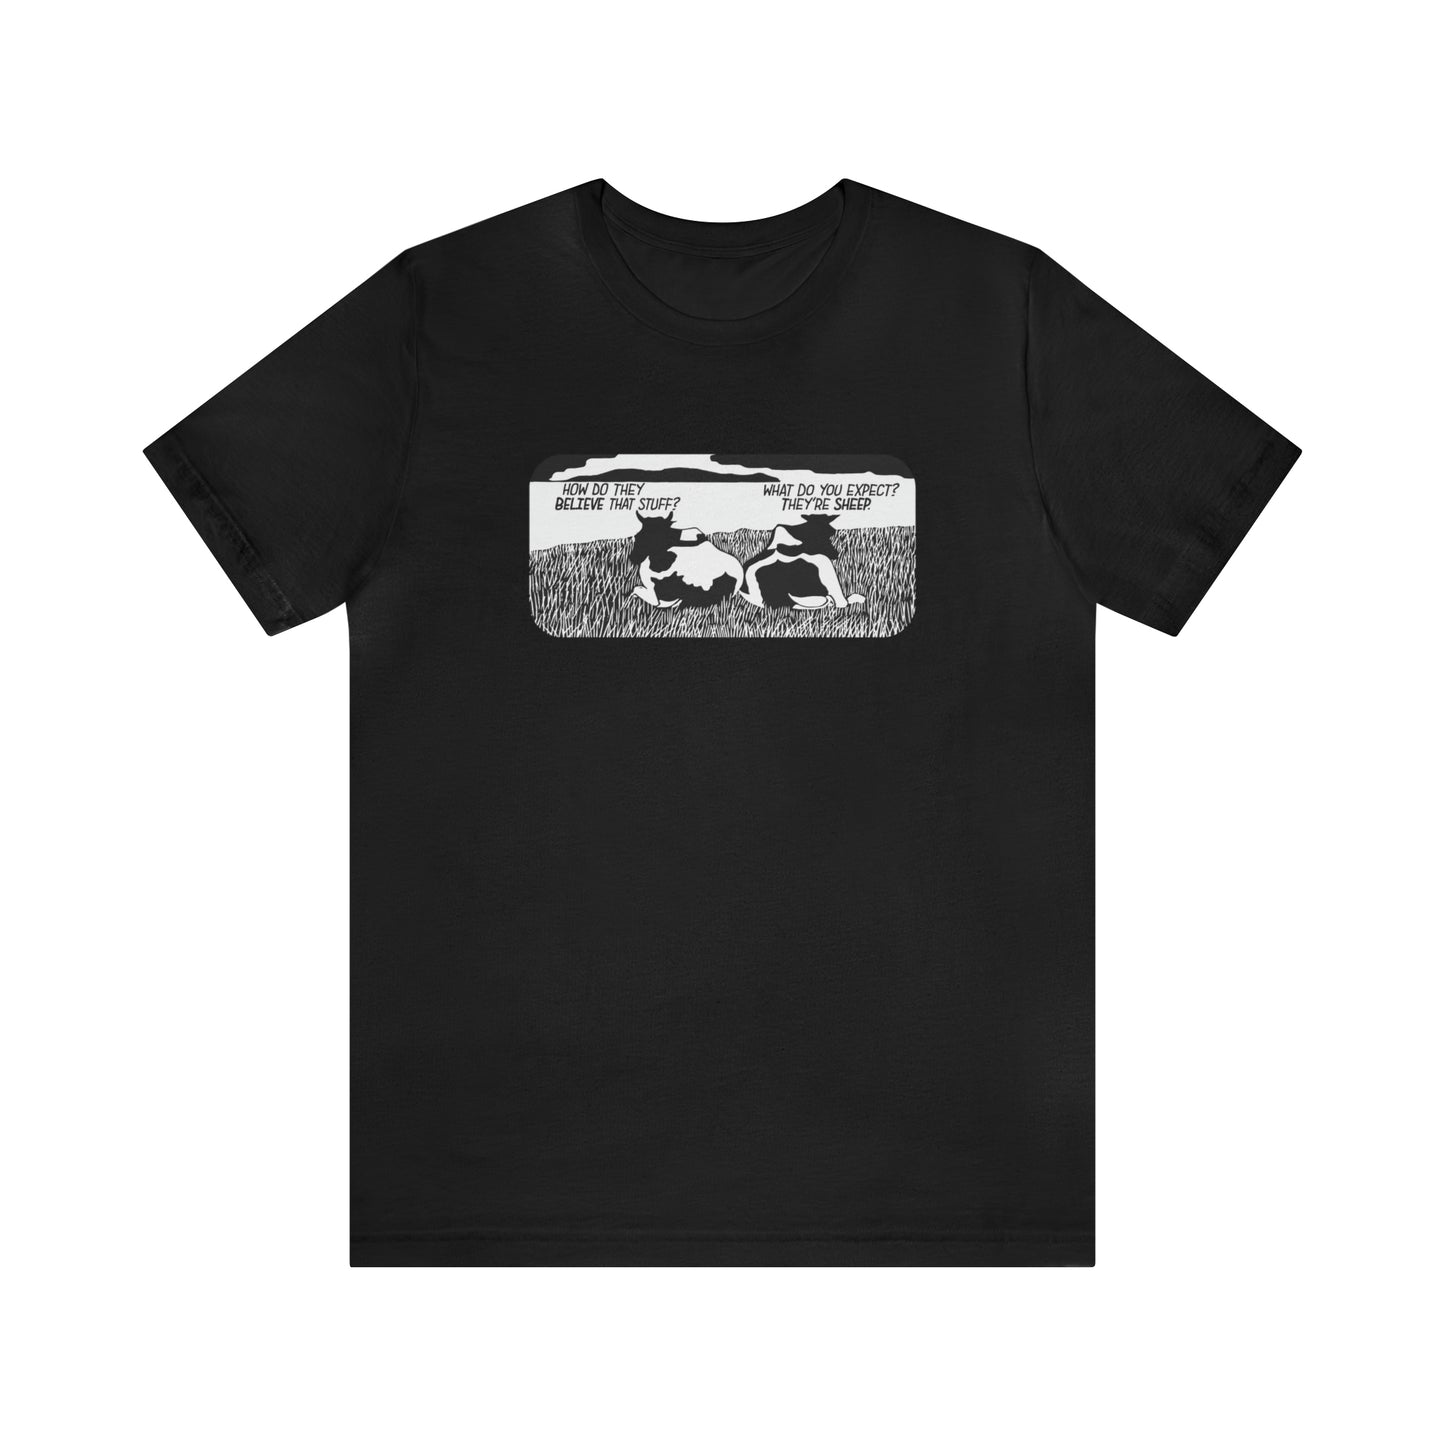 They're Sheep - Unisex T-Shirt